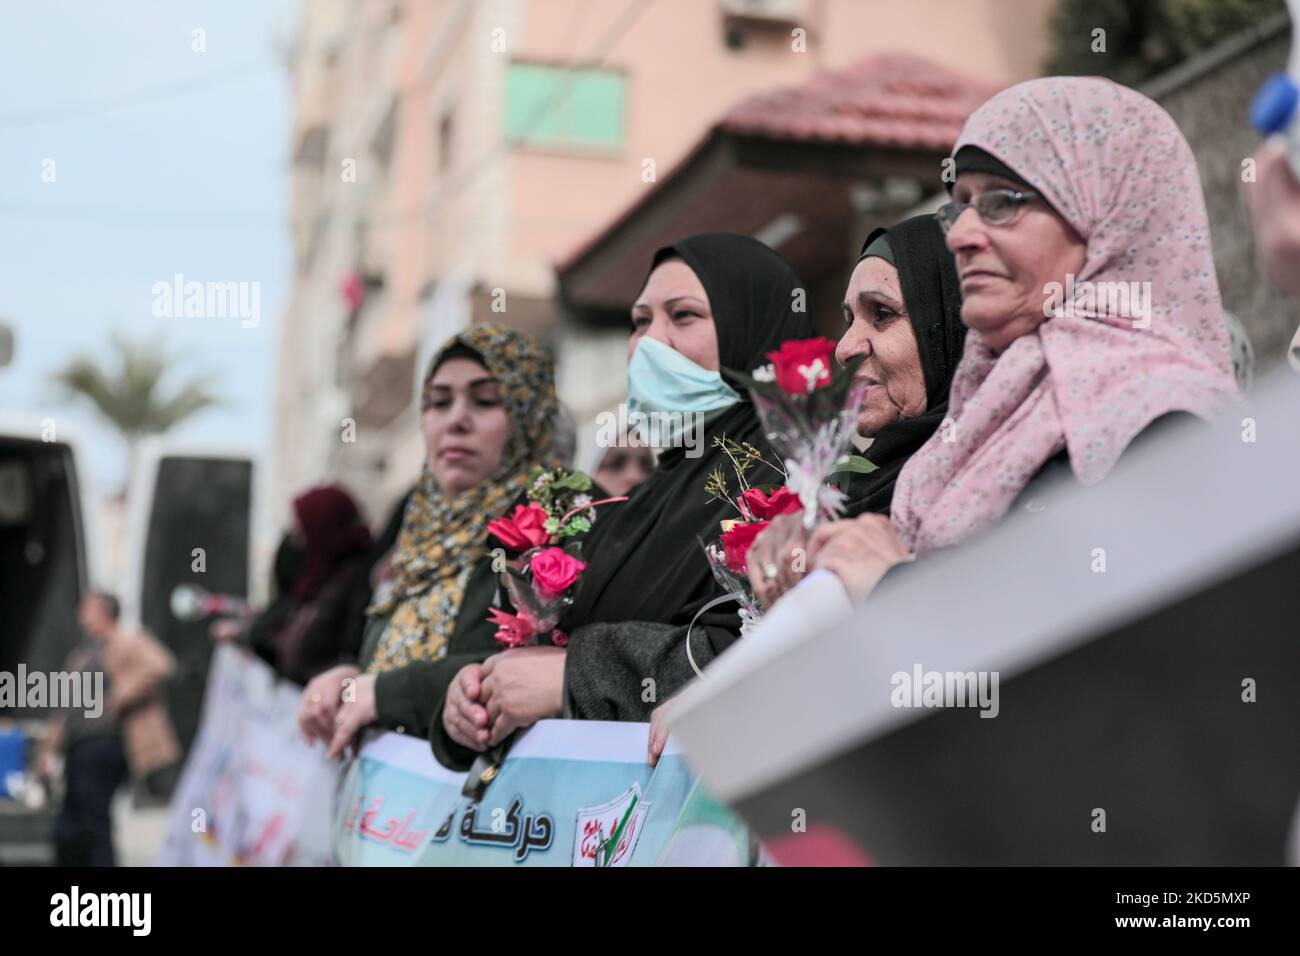 Mothers of Palestinian prisoners carry roses on International Mother's Day during a stand in solidarity with their sons in Israeli prisons(Photo by Momen Faiz/NurPhoto) Stock Photo